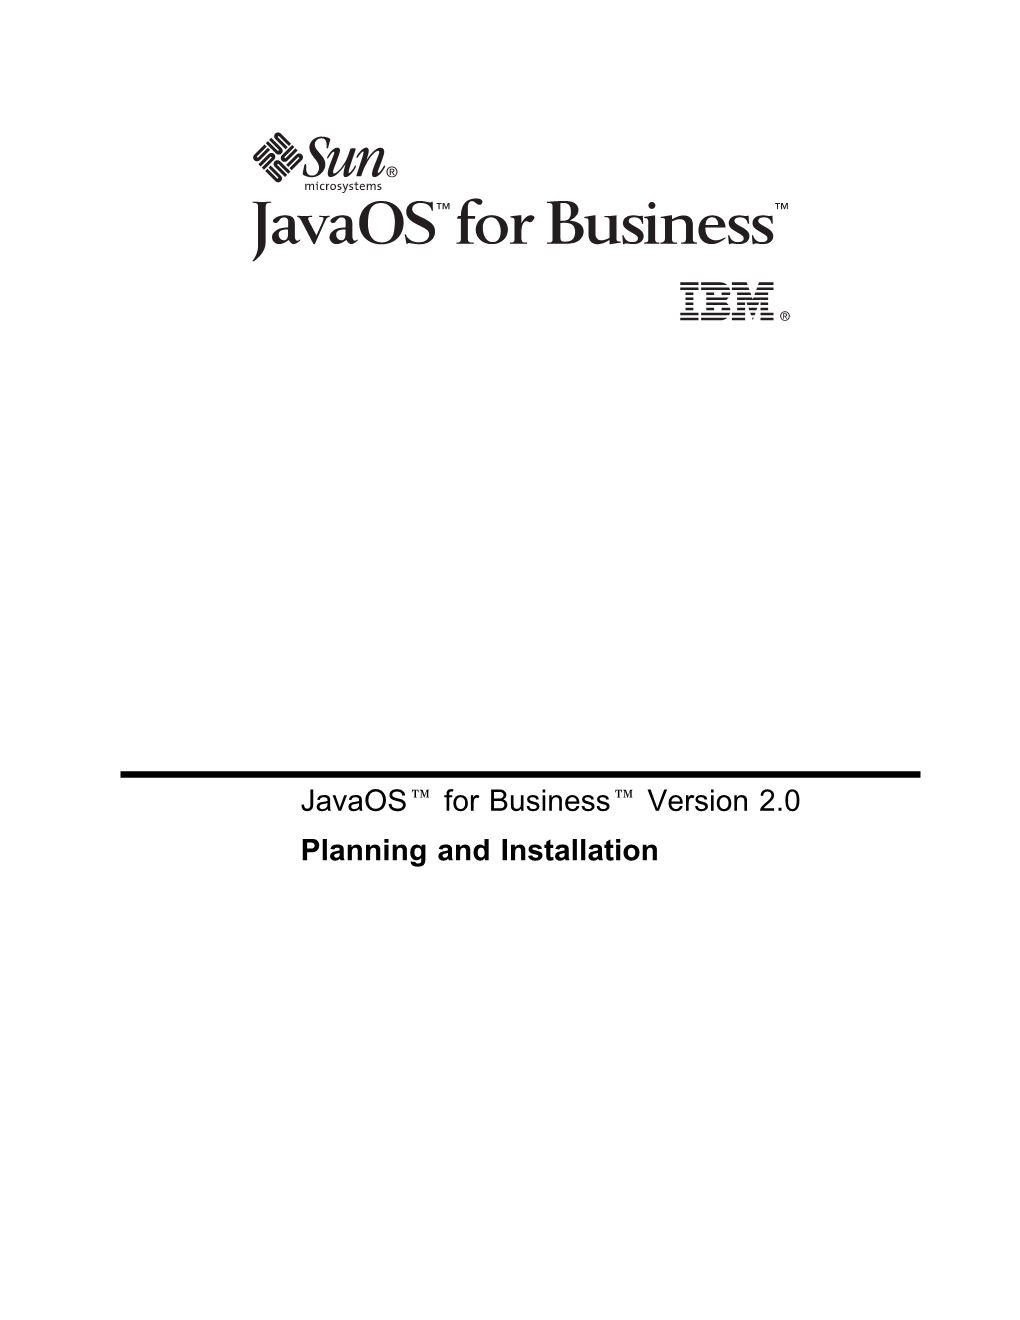 Javaos™ for Business™ Version 2.0 Planning and Installation